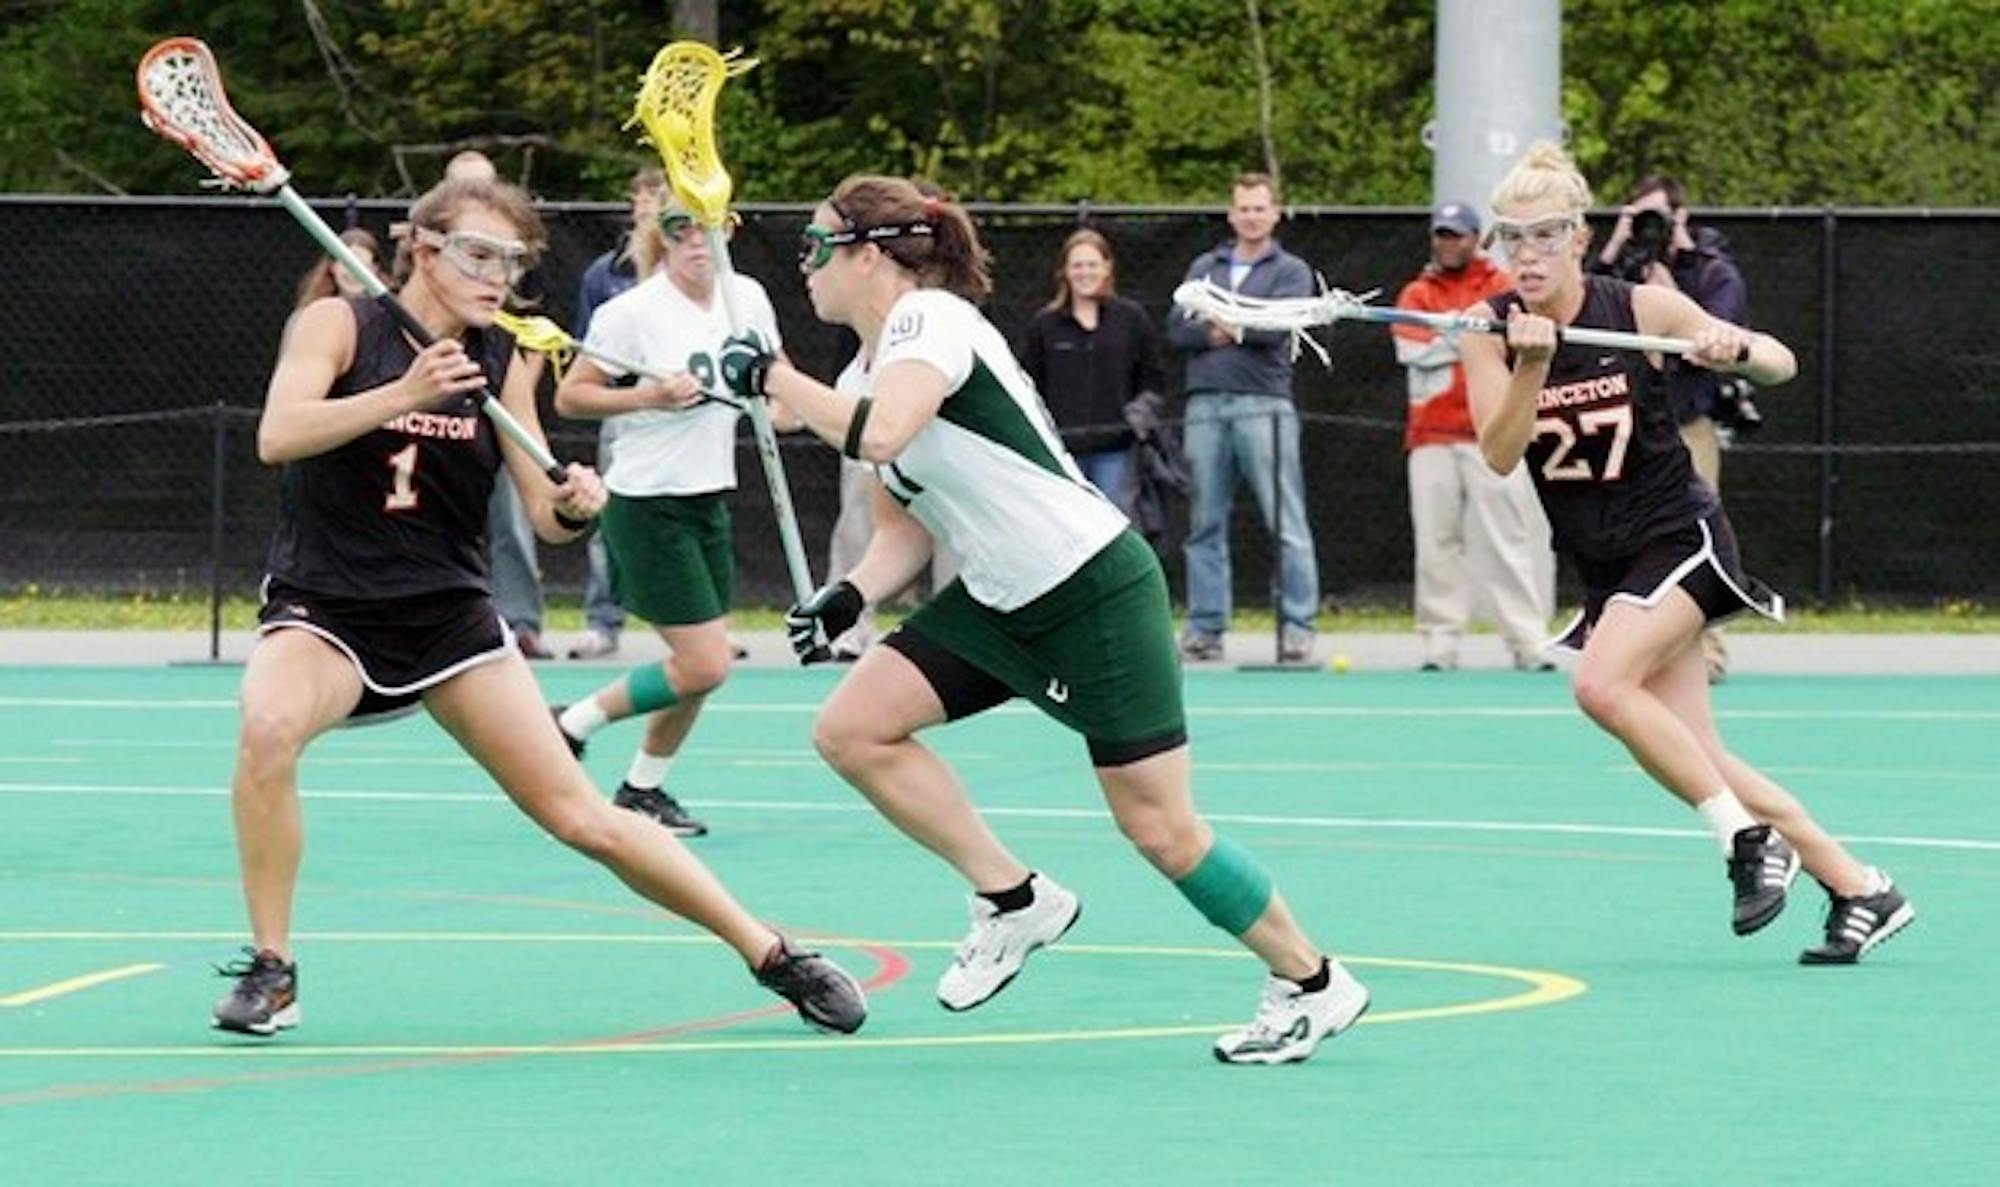 Jen Pittman '07 (pictured above) netted three goals to lead the Big Green to a thrilling 7-6 victory Saturday.